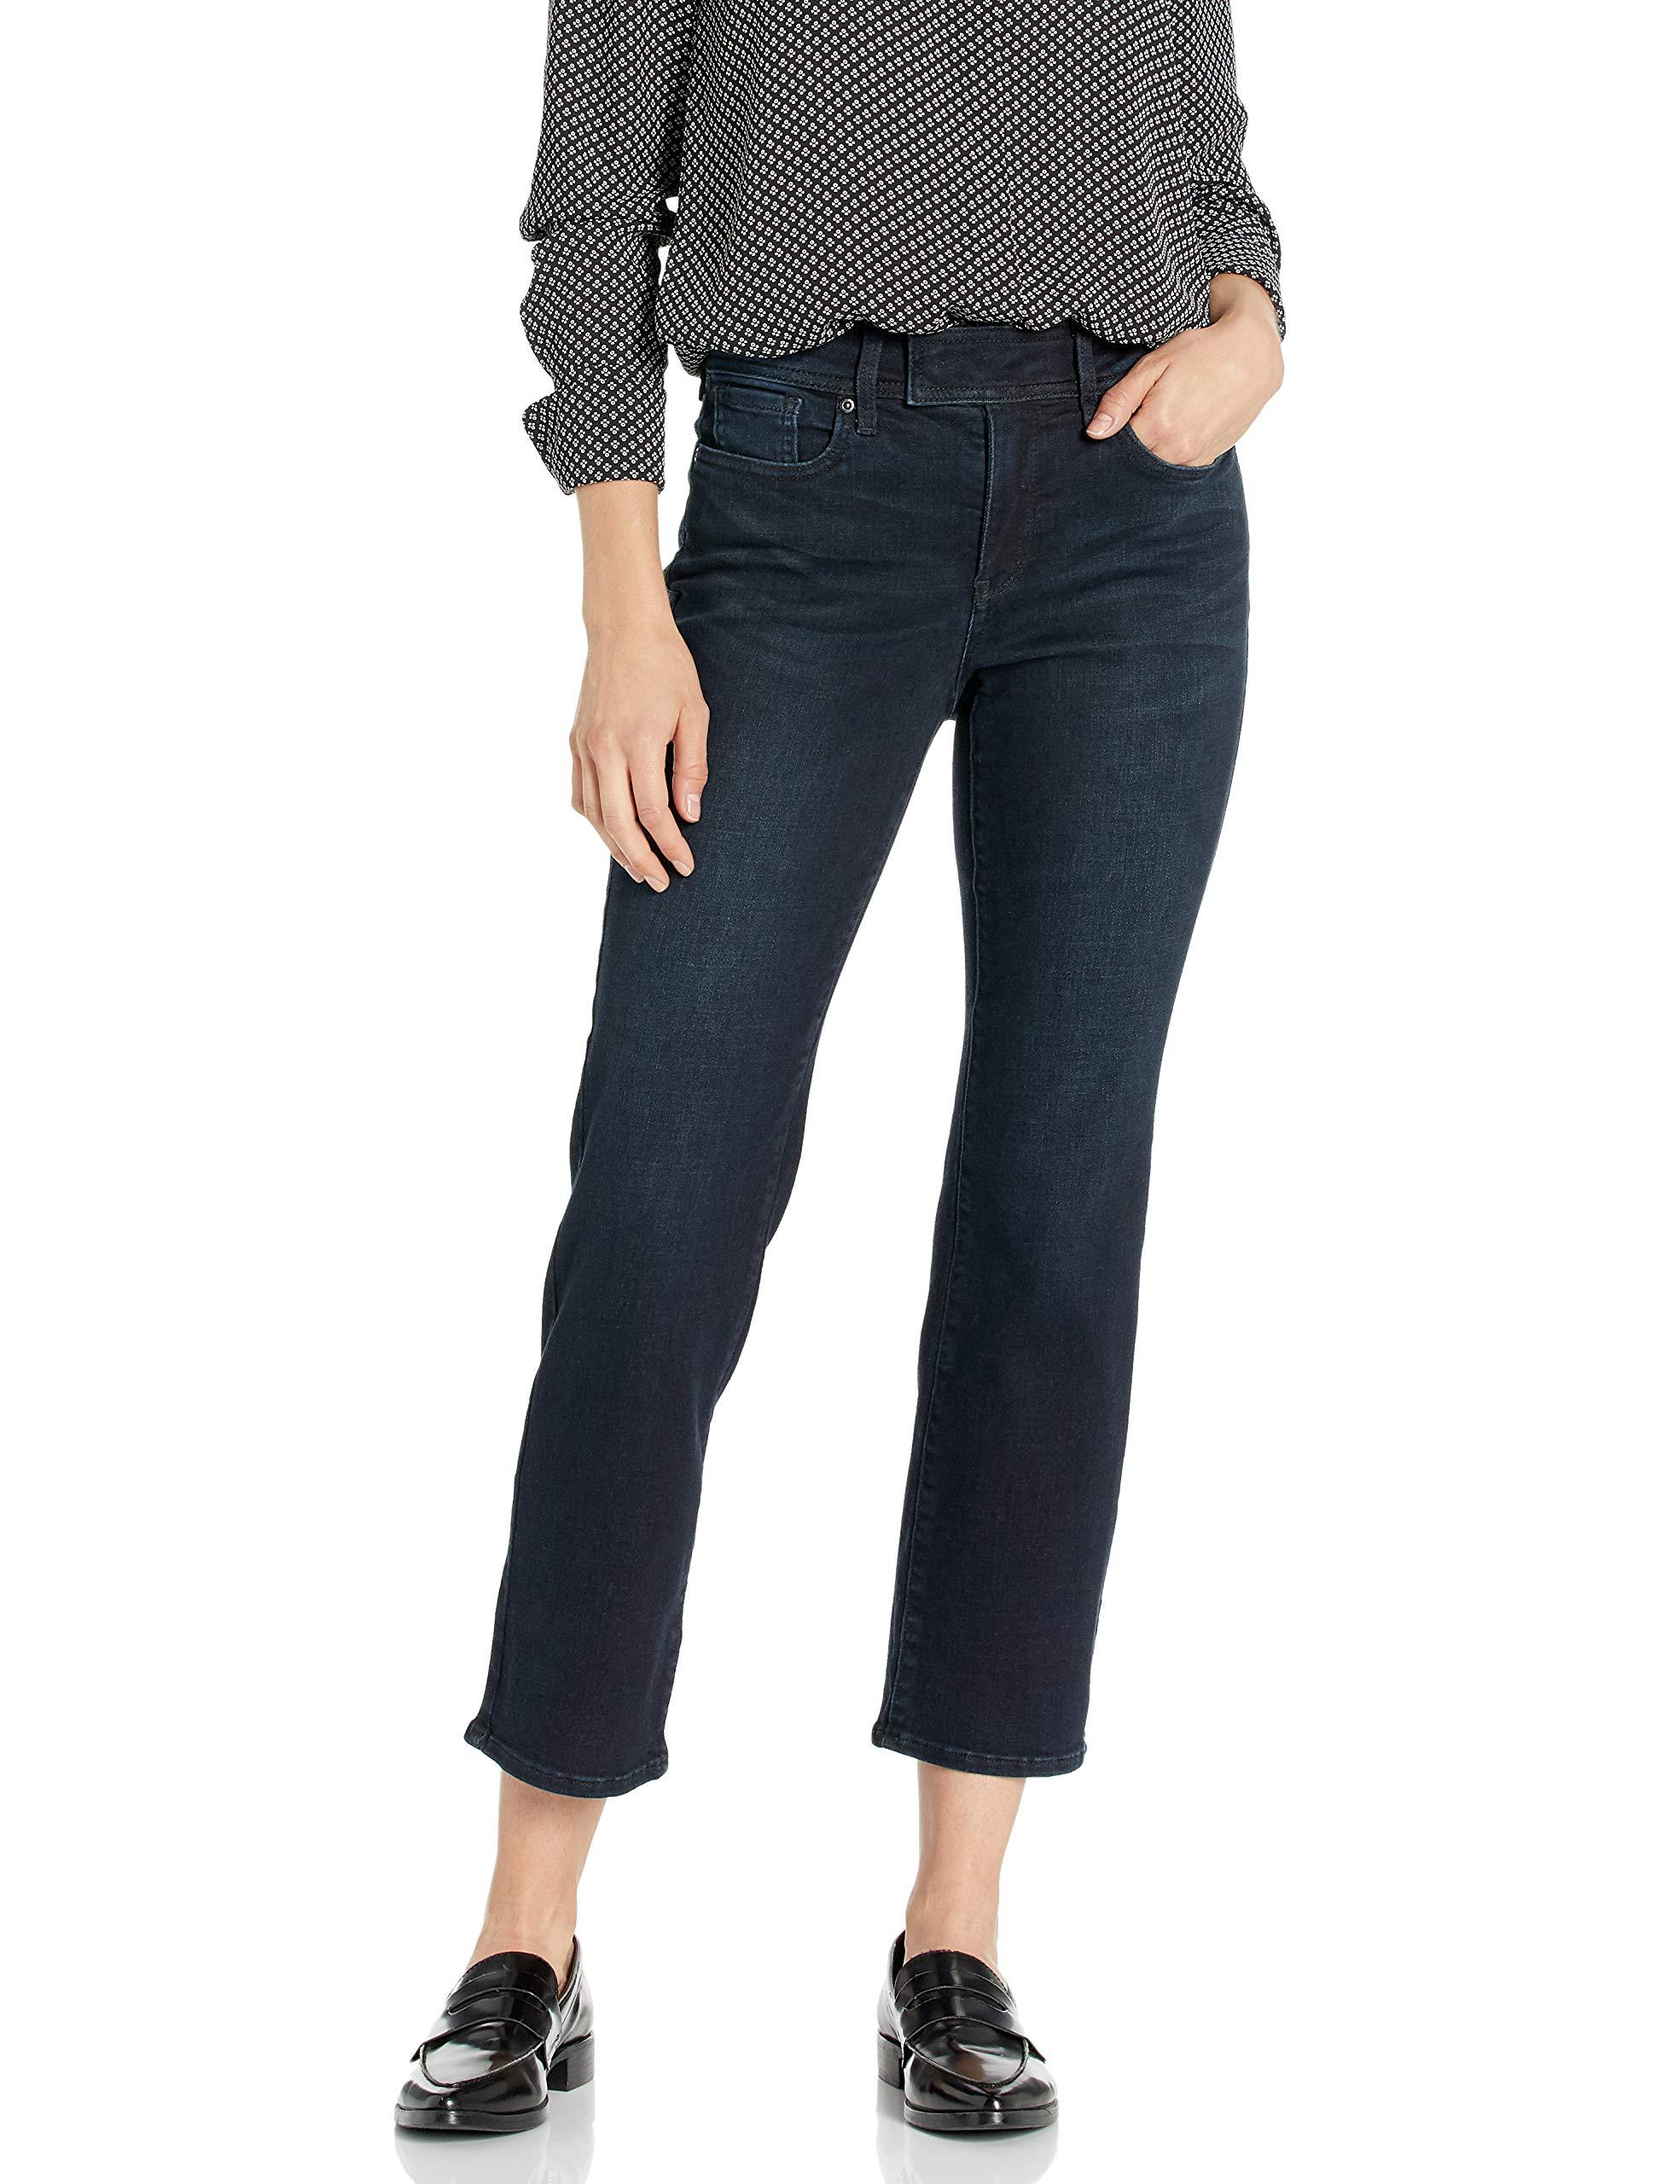 NYDJ Denim Marilyn Straight Ankle Jeans in Blue - Save 51% - Lyst